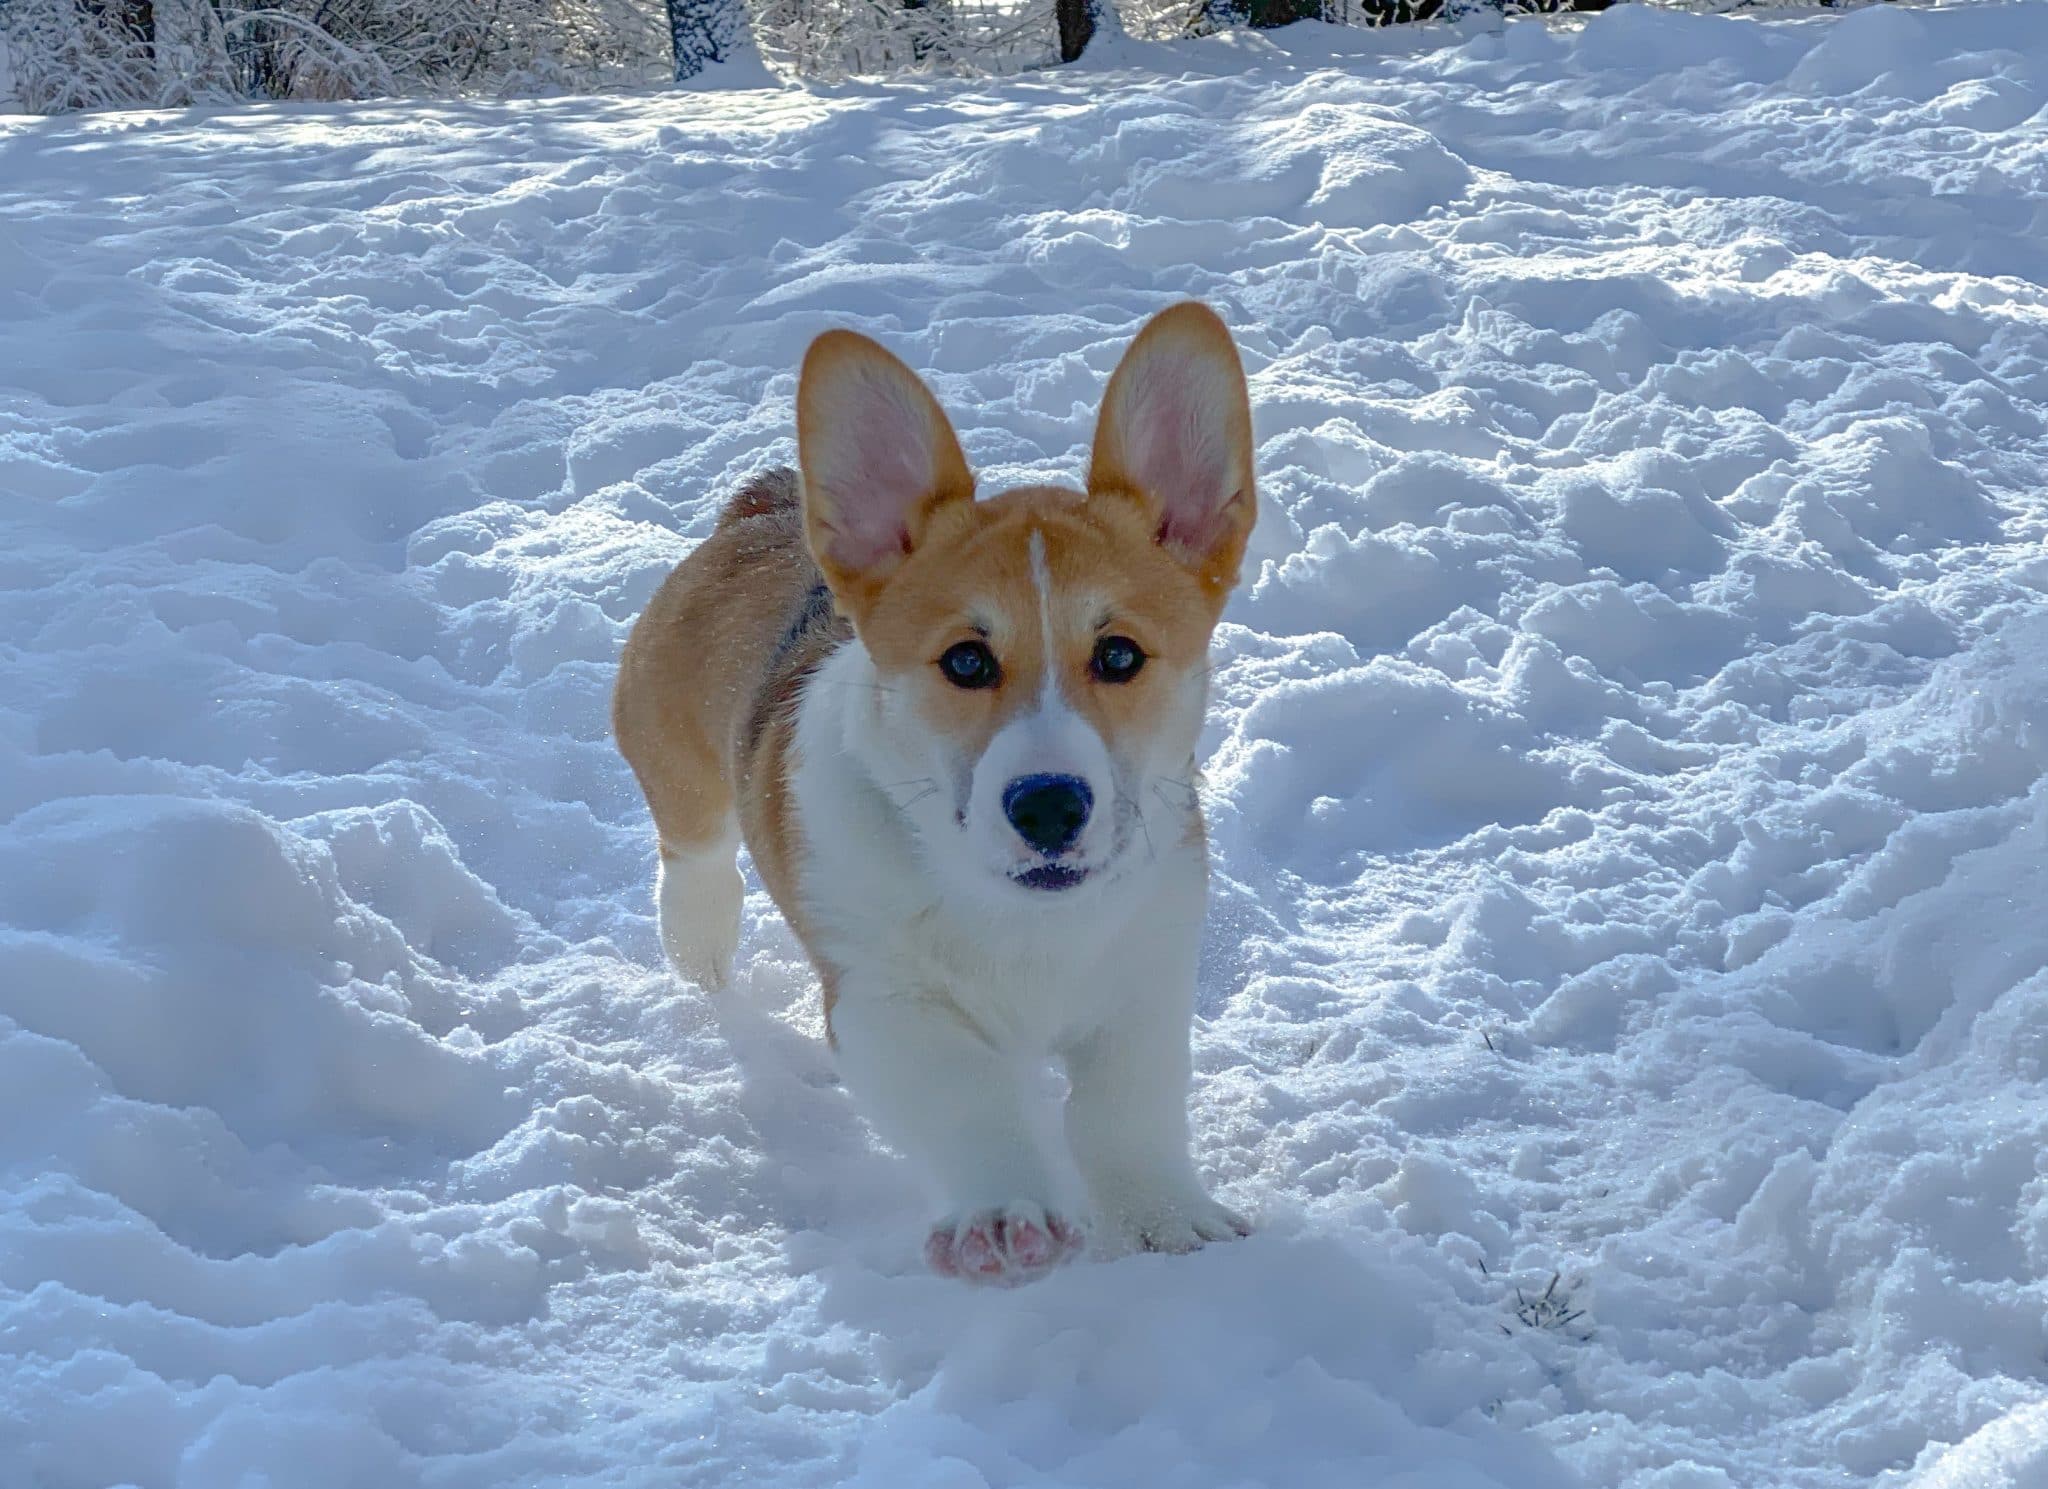 Corgi puppy playing in the snow